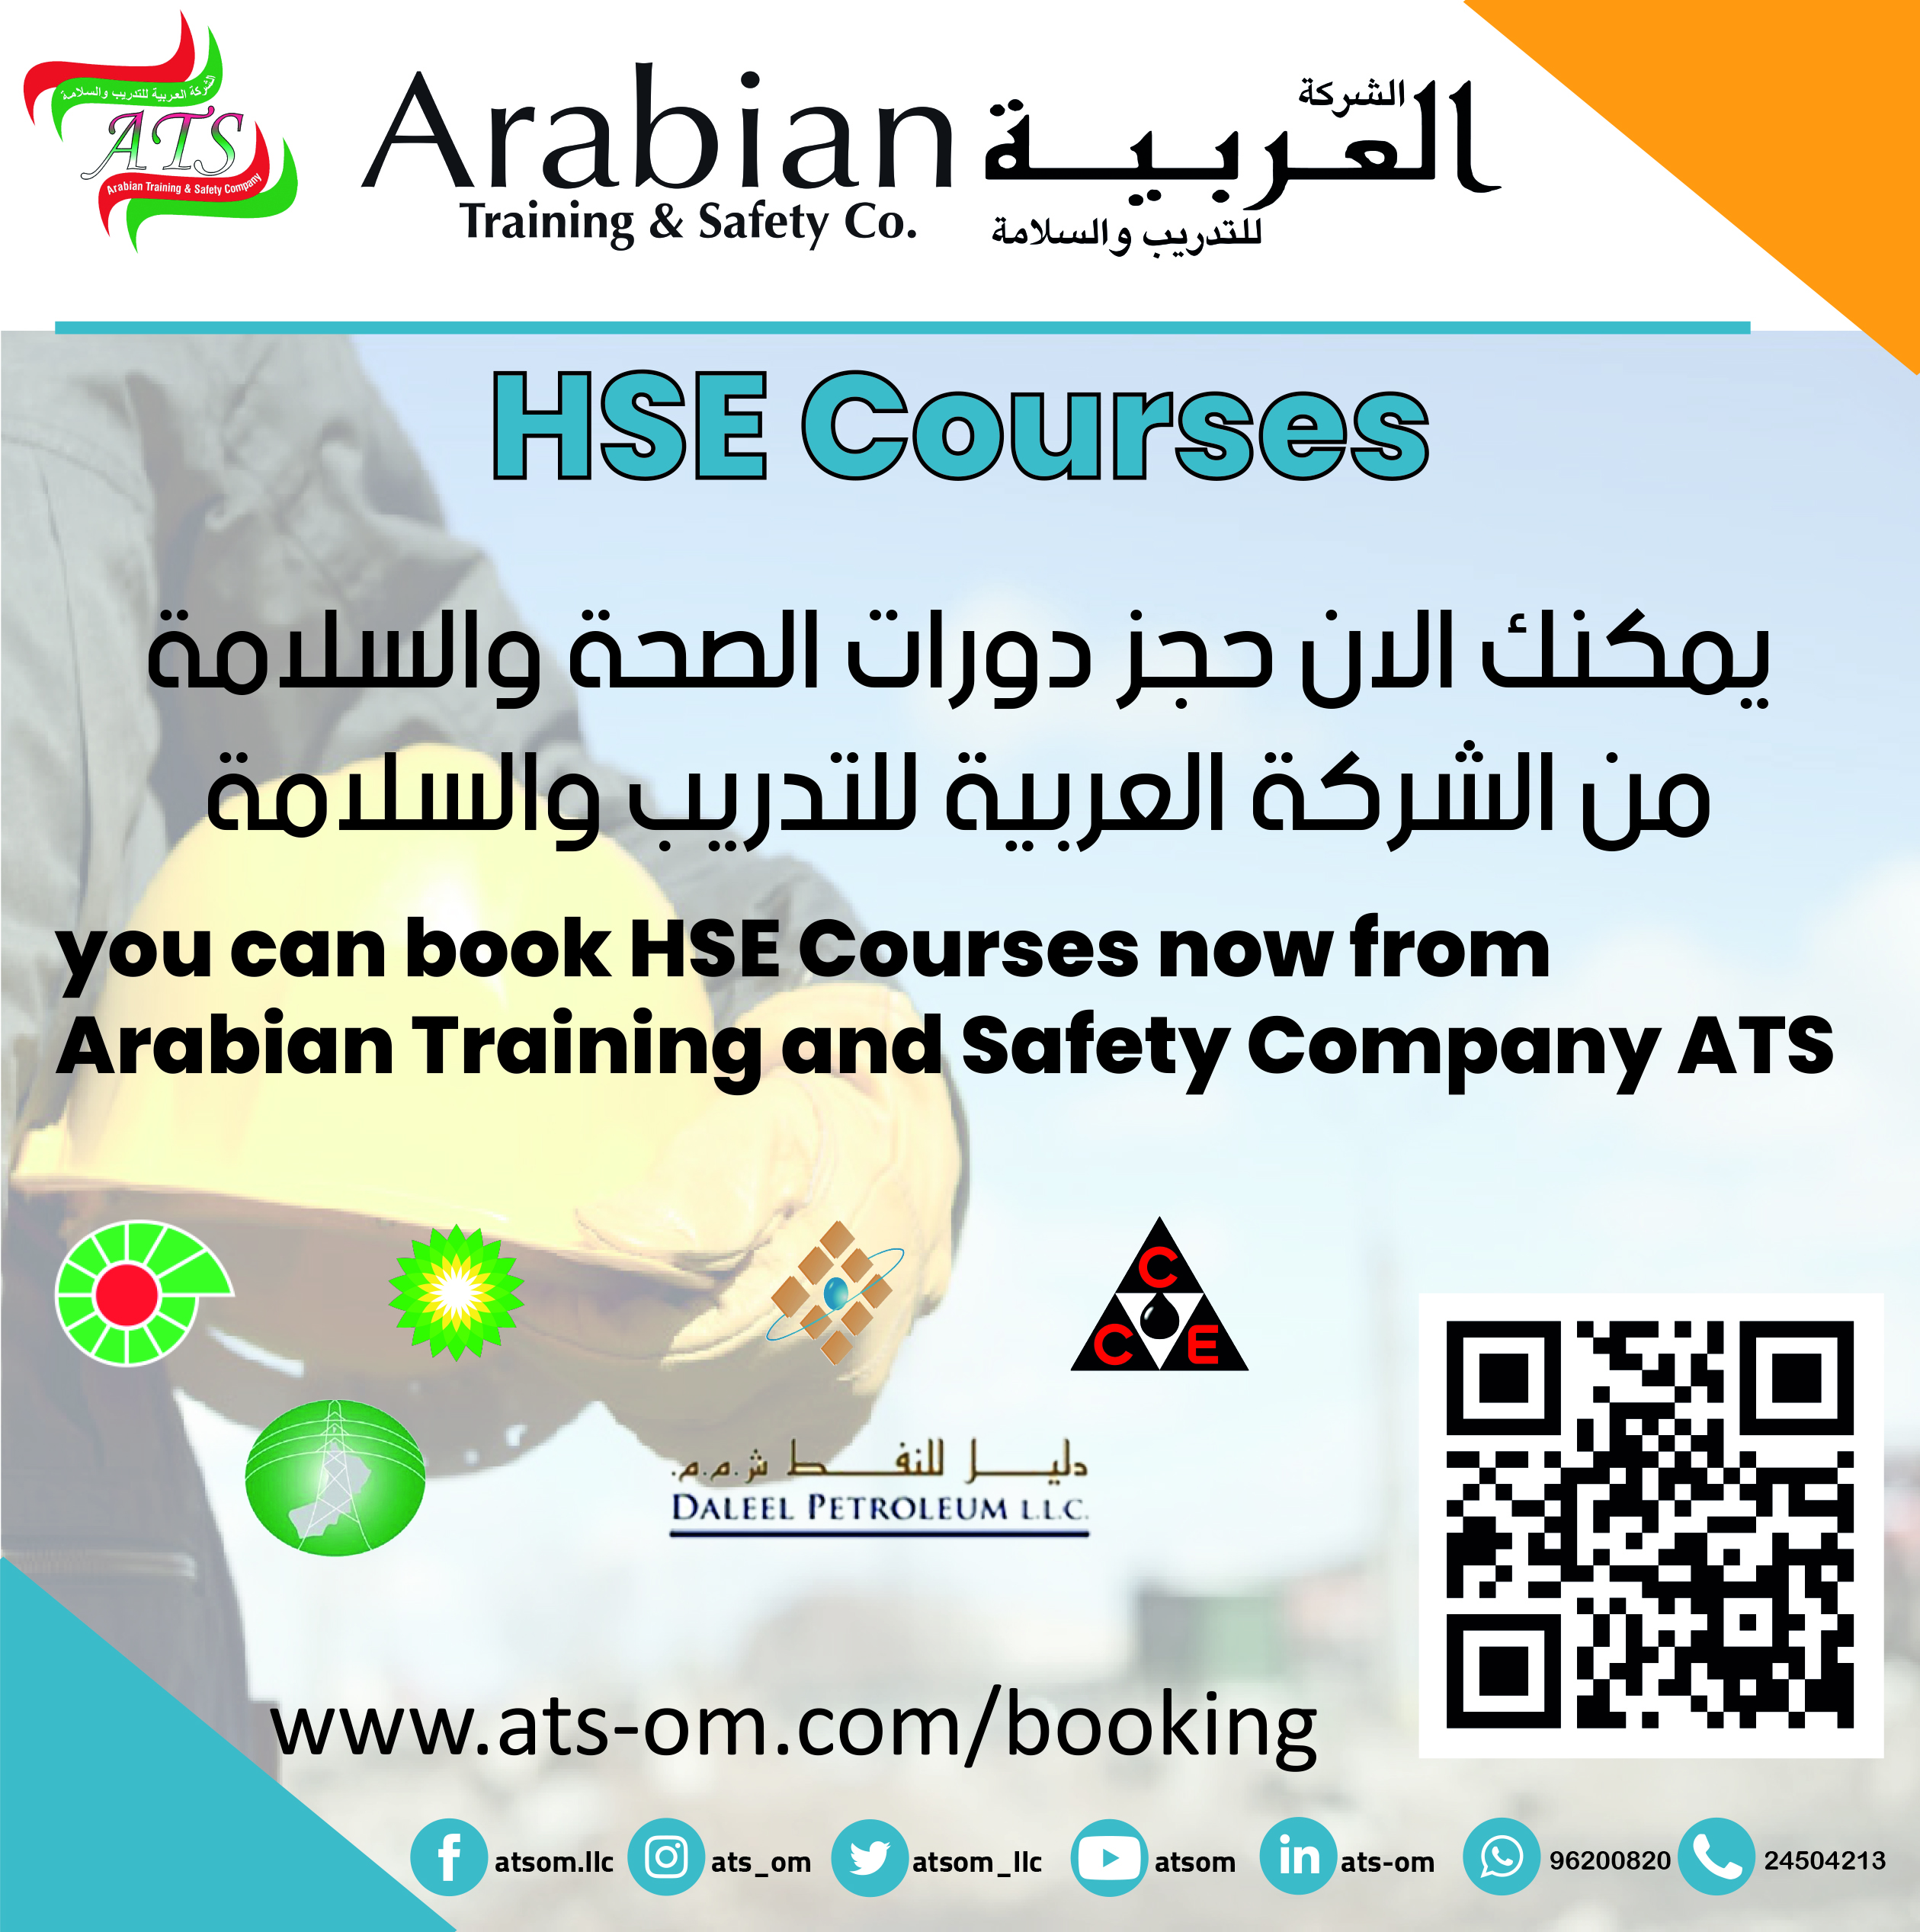 Booking HSE Courses